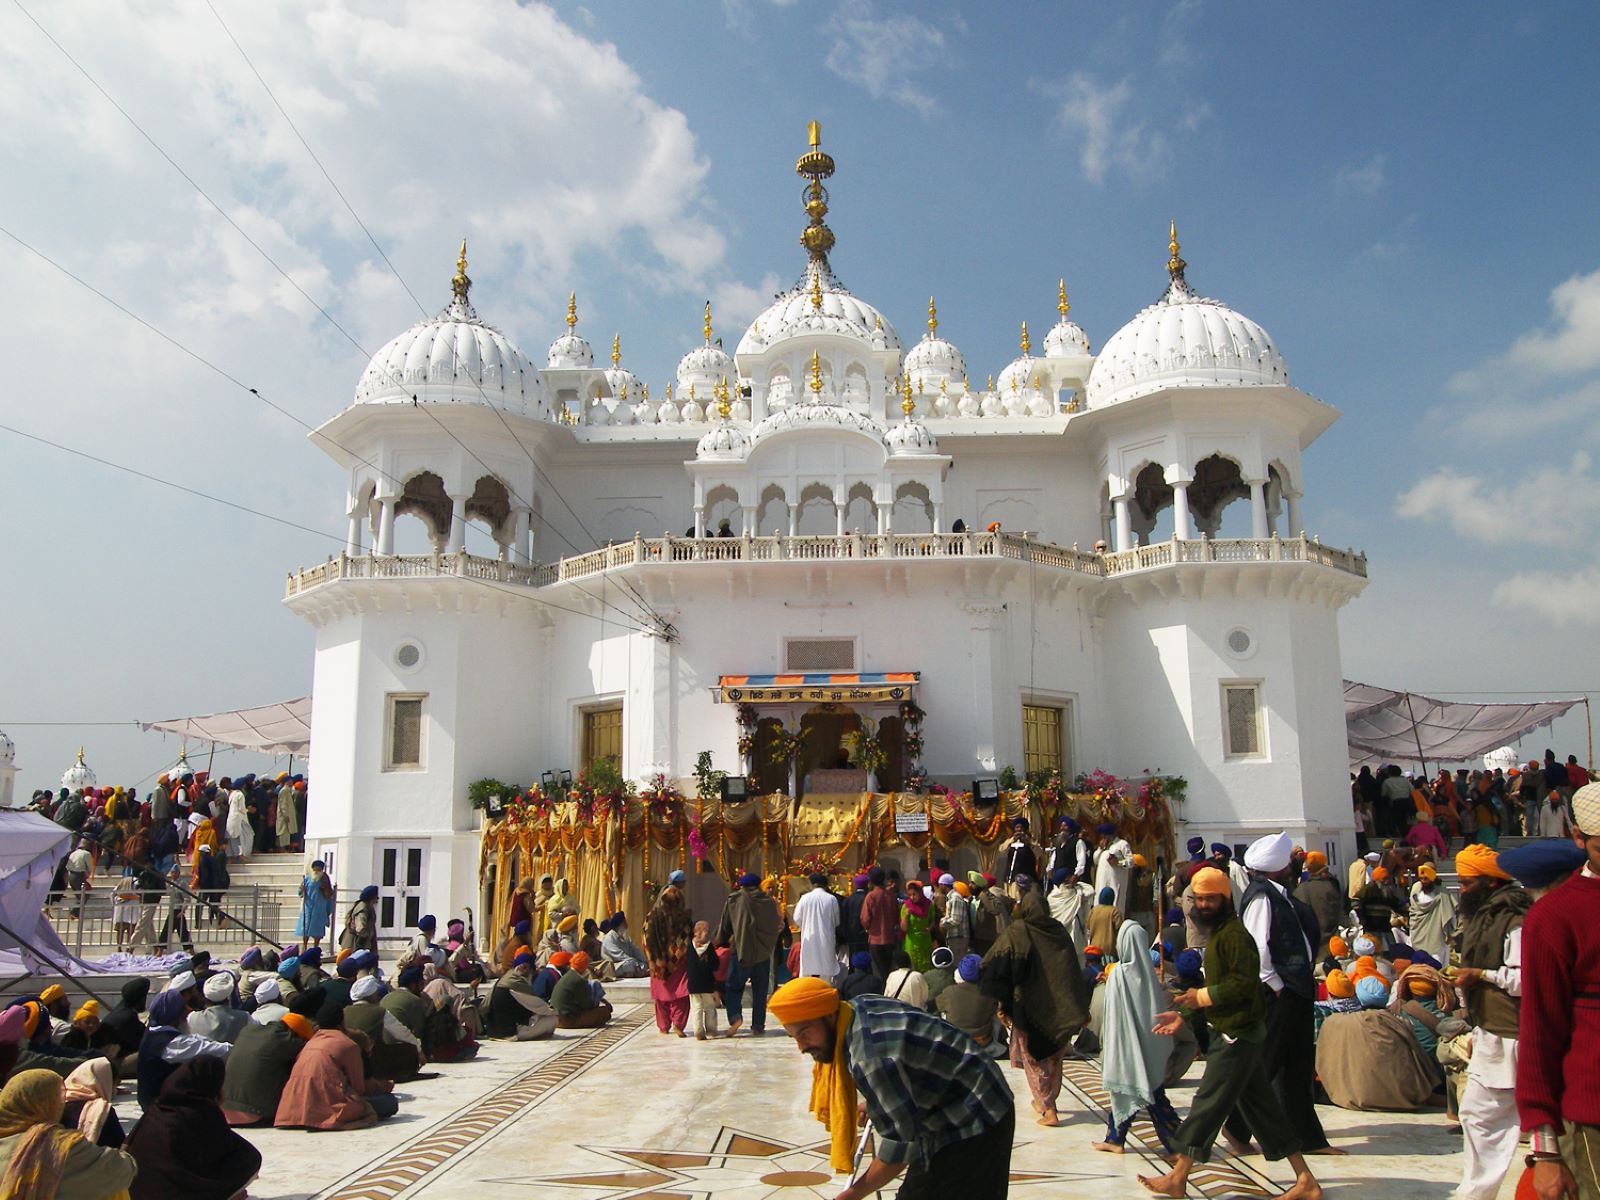 9-fascinating-facts-about-takht-kesgarh-sahib